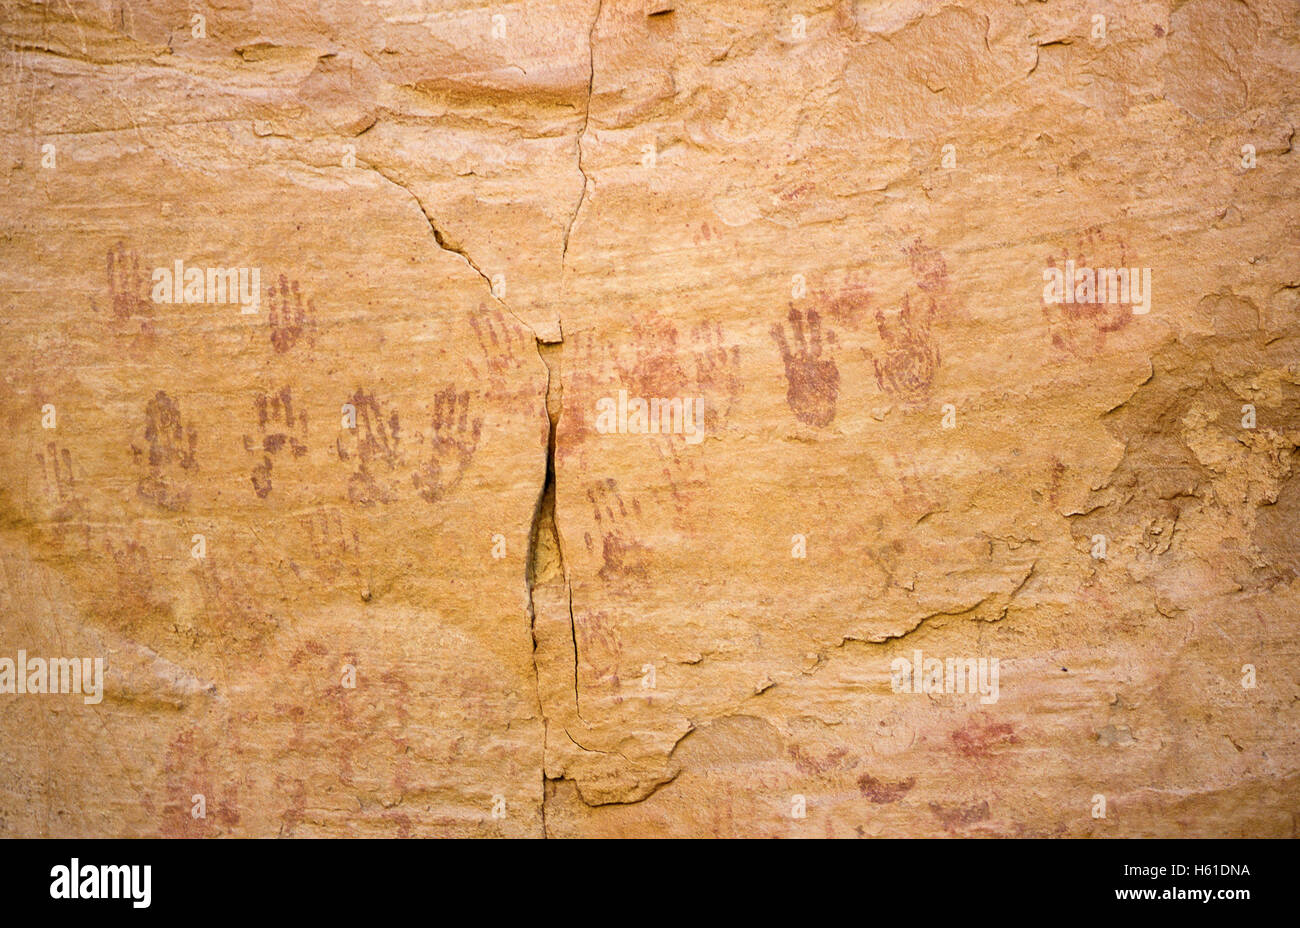 Handprints as rock art on canyon wall in Canyon de Chelly National Monument, Arizona Stock Photo